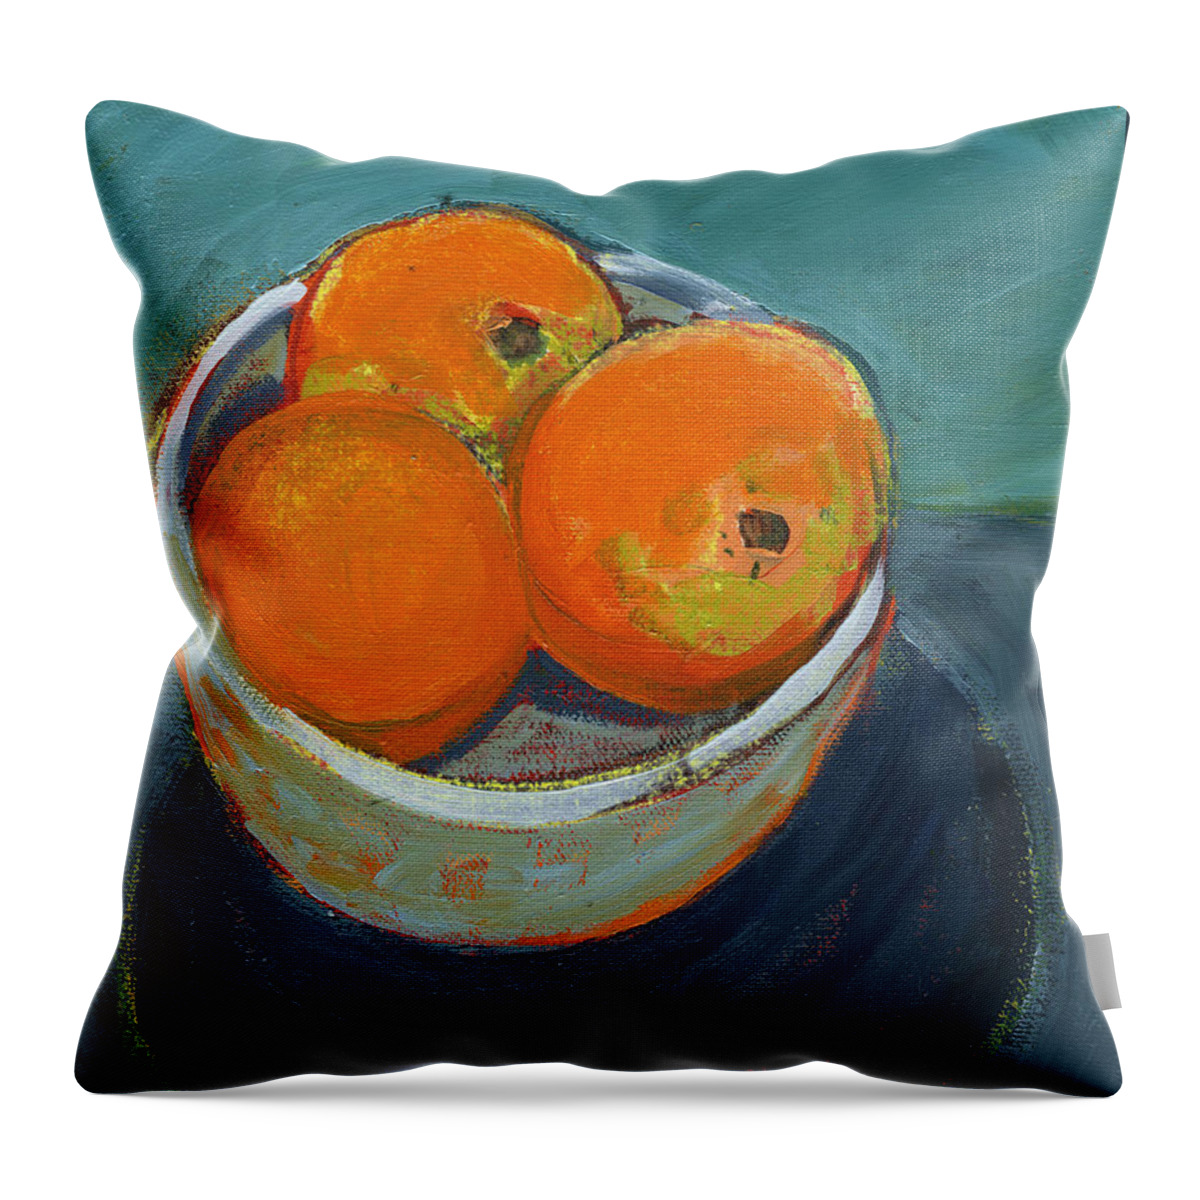 Orange Throw Pillow featuring the painting The Community Bowl Project by Jennifer Lommers